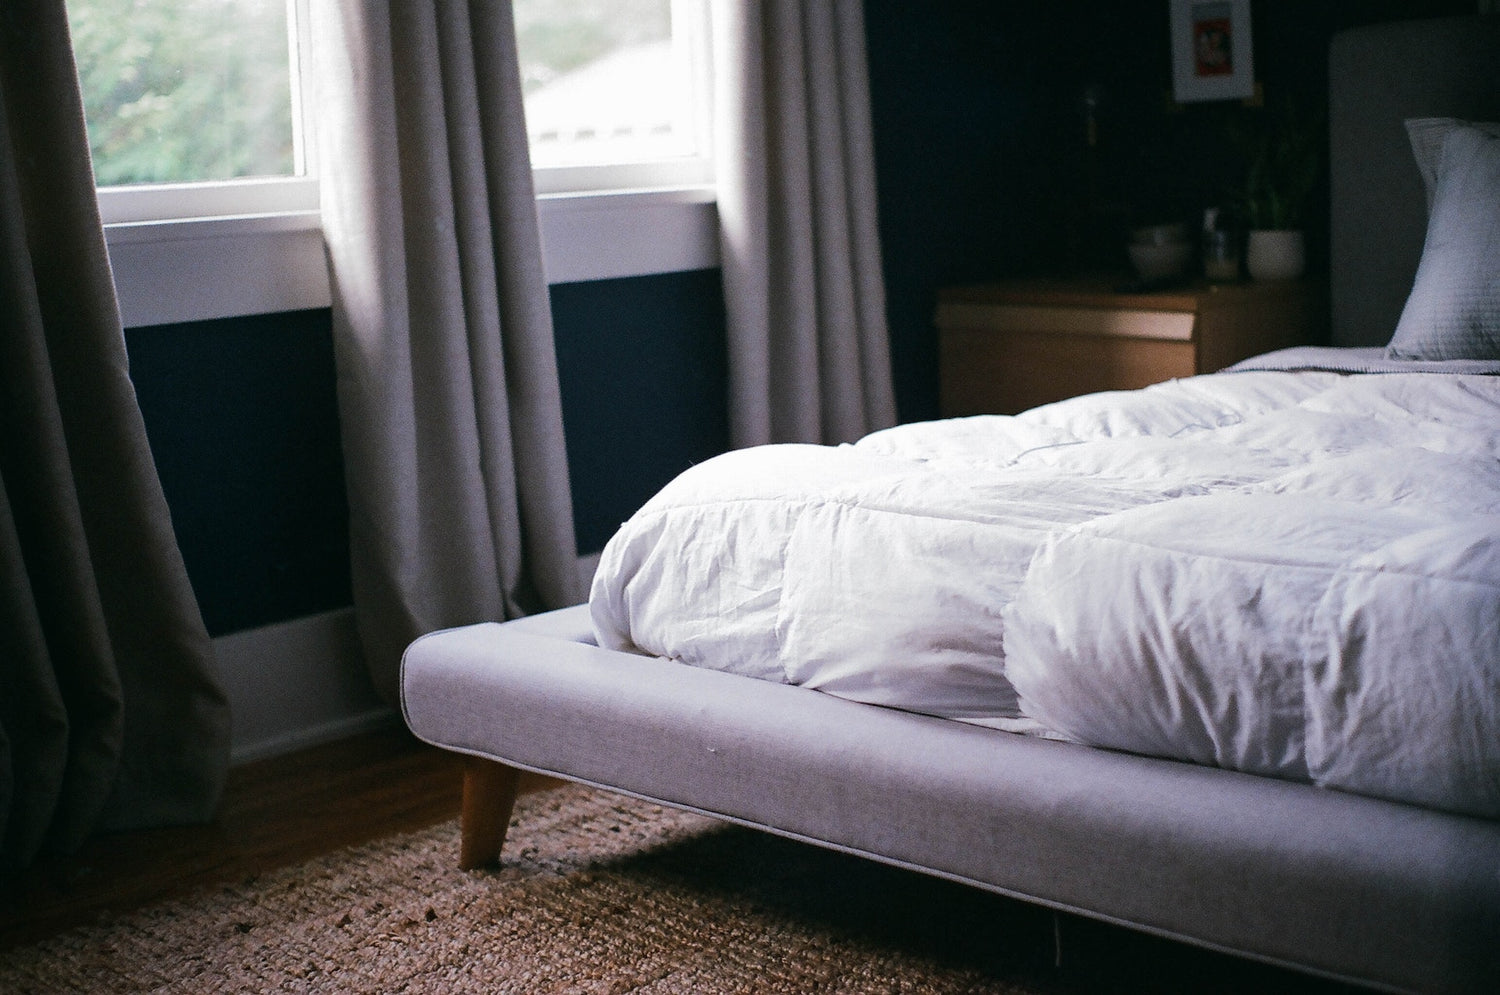 How to Disinfect Your Mattress